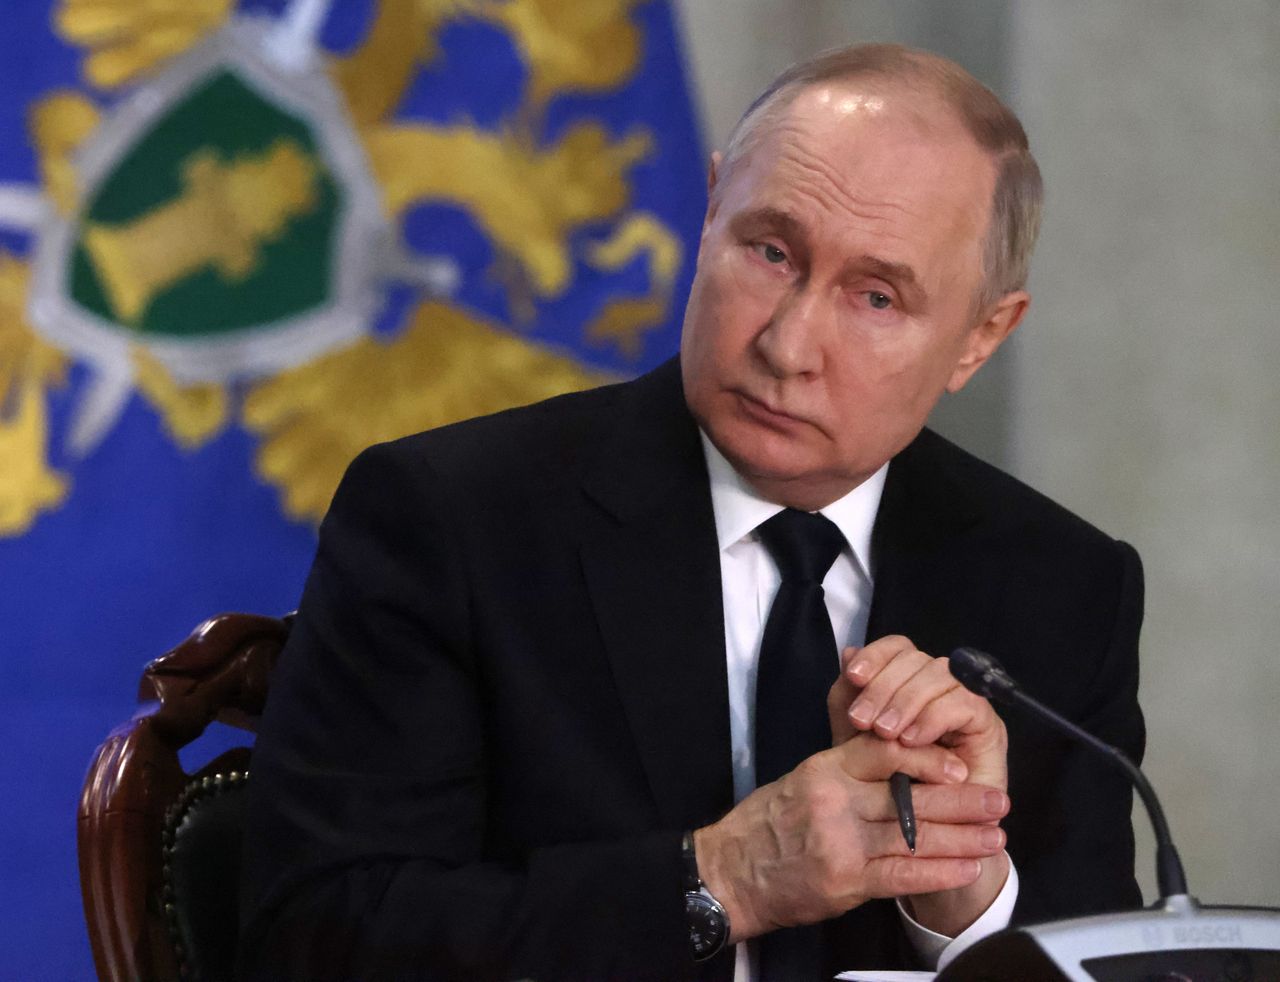 Putin may launch an attack on more countries, including Moldova.